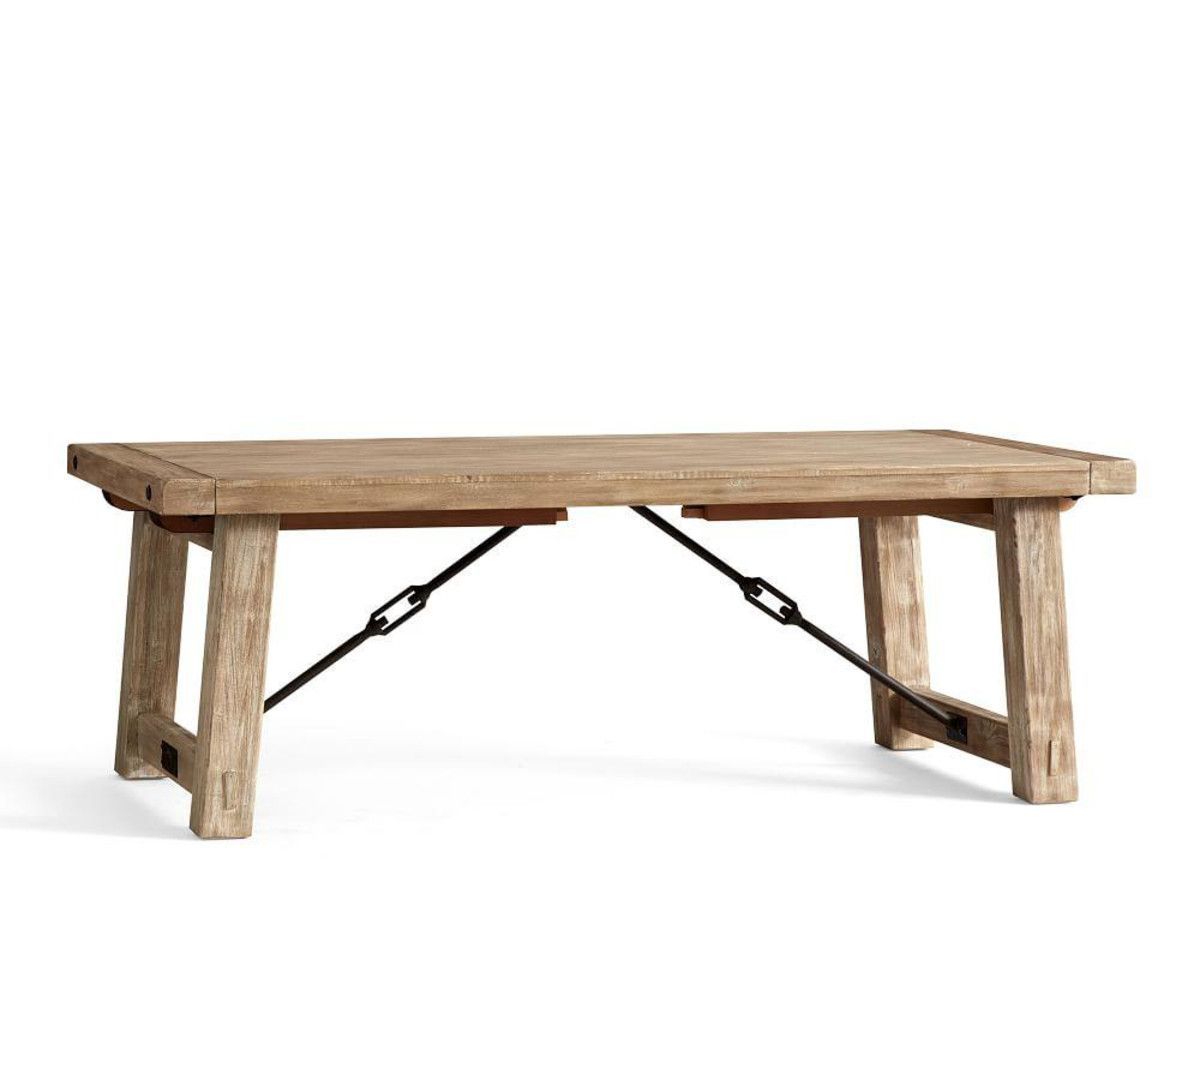 Benchwright Extending Dining Table, Seadrift | Kitchen Love With Regard To Most Recent Seadrift Benchwright Extending Dining Tables (Photo 1 of 25)